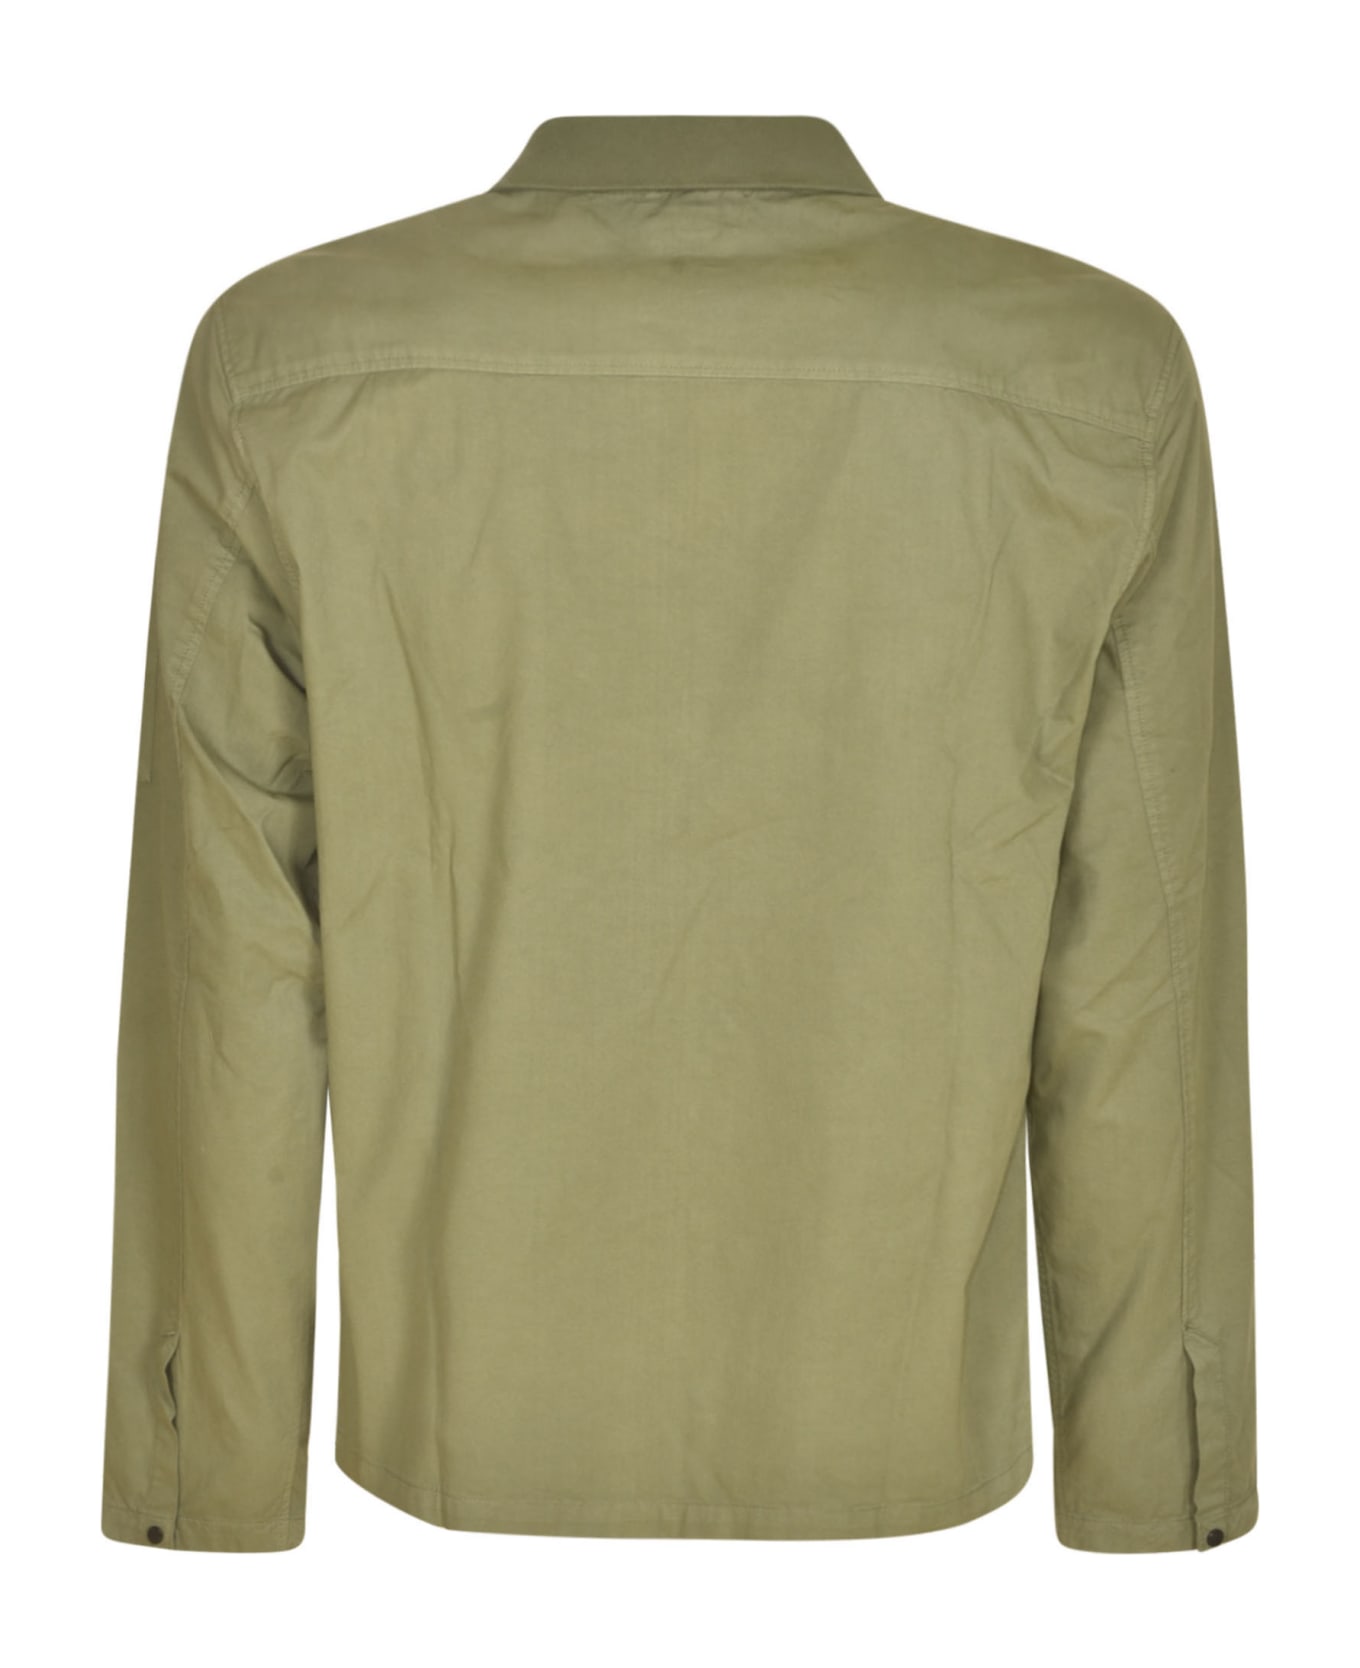 C.P. Company Classic Long-sleeved Shirt - Agave